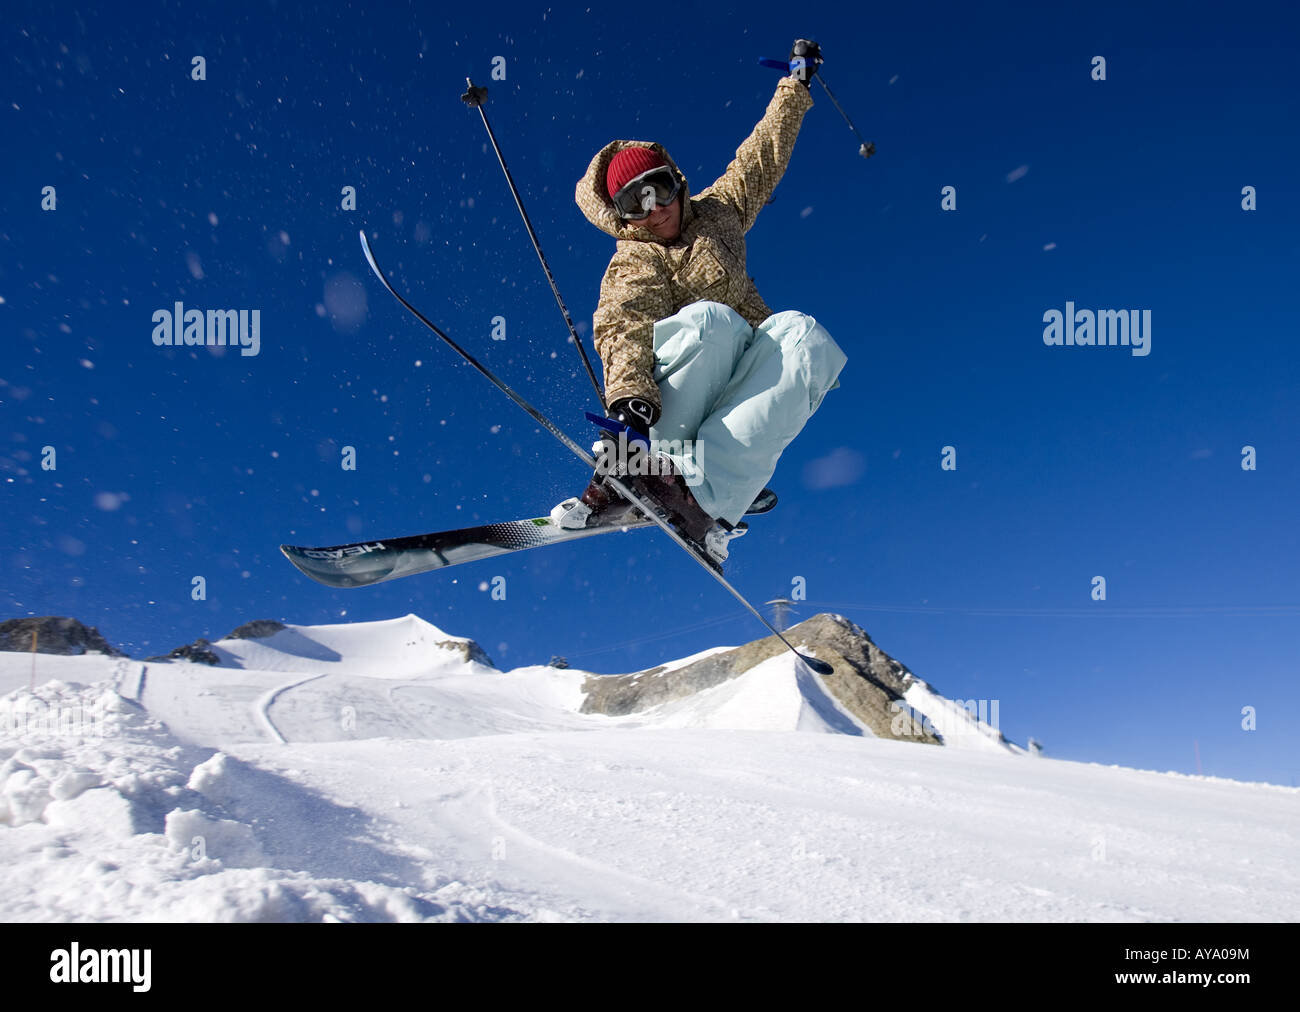 Skier in mid air stunt against blue sky, Tignes, France Stock Photo